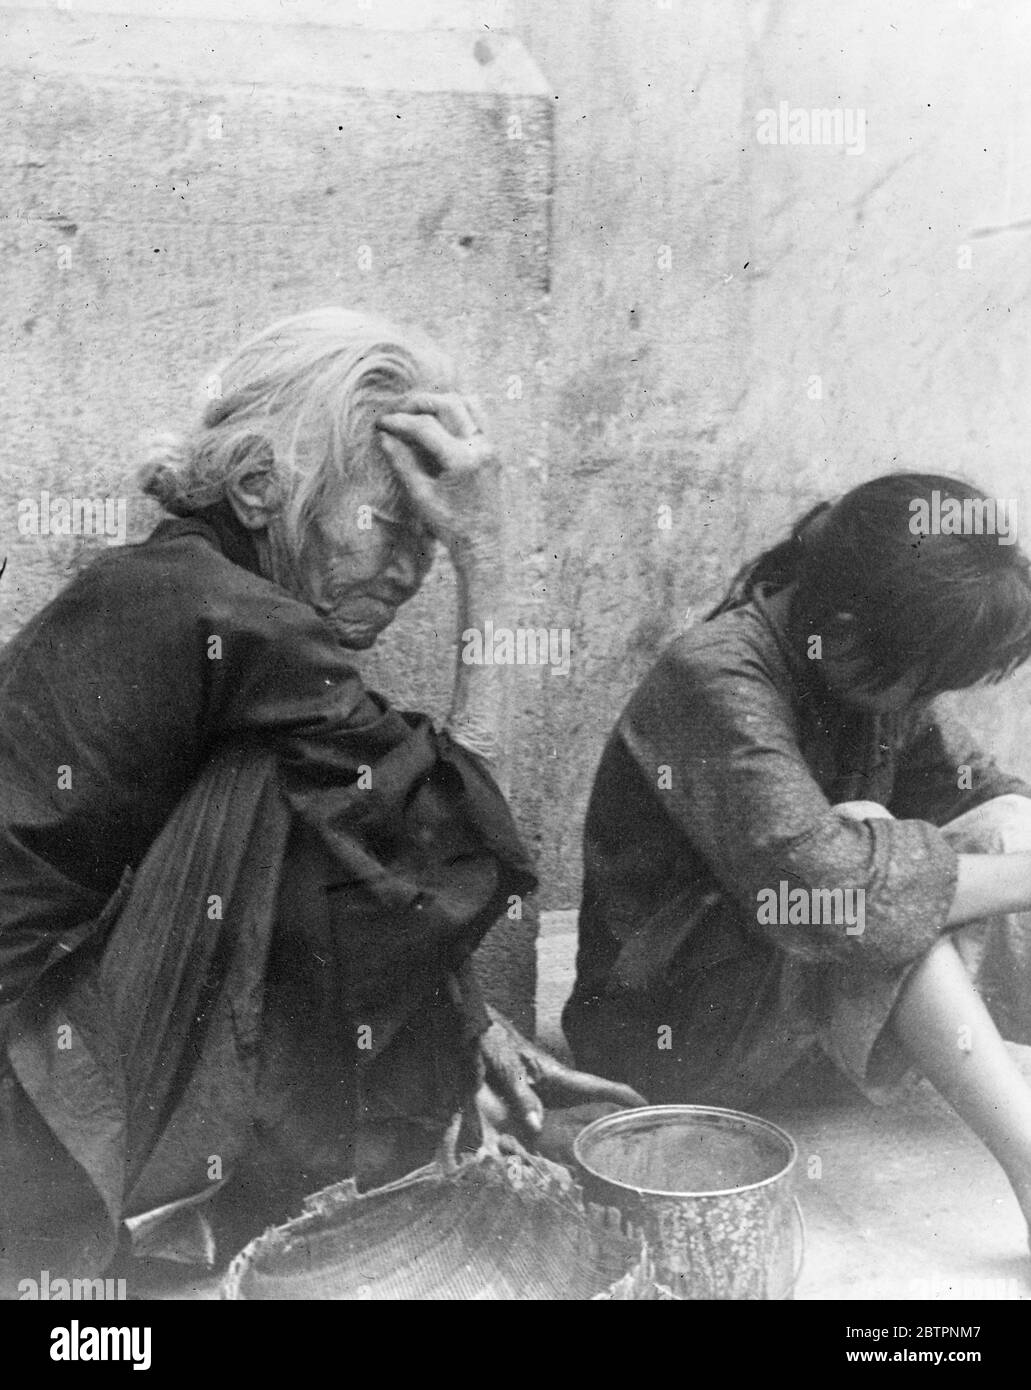 This is despair. Utter dejection, the depths of misery, touched by this old woman and a little girl whose only home is a Shanghai pavement after warplanes have rained bombs on one of the poorest quarters of the city. 27 September 1937 Stock Photo